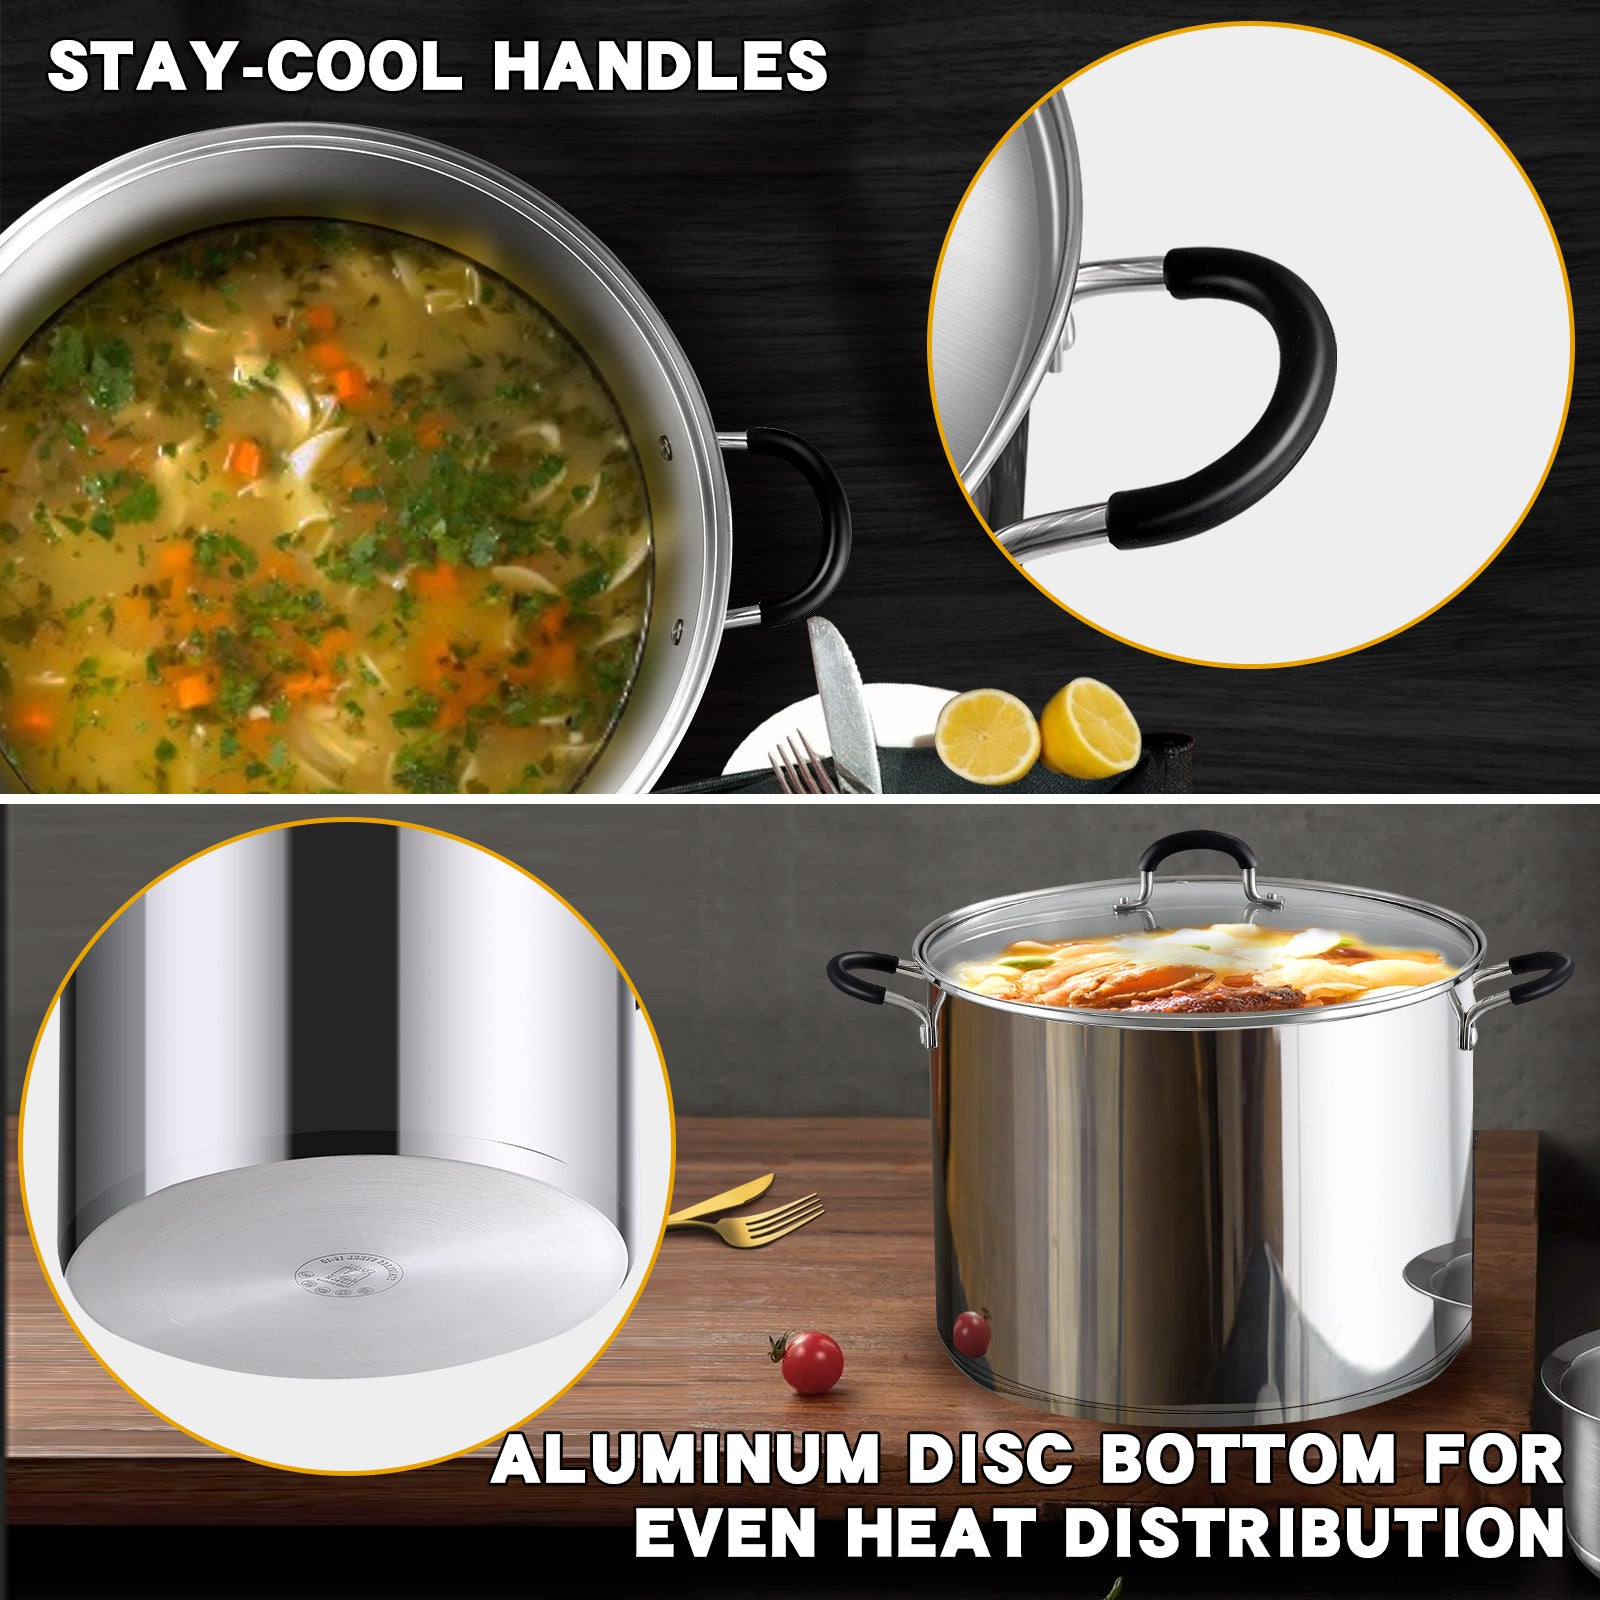 Stainless Steel Stockpot, P&P CHEF 4 Quart Stock Pot with Lid, Heat-Proof  Double Handles - Dishwasher Safe